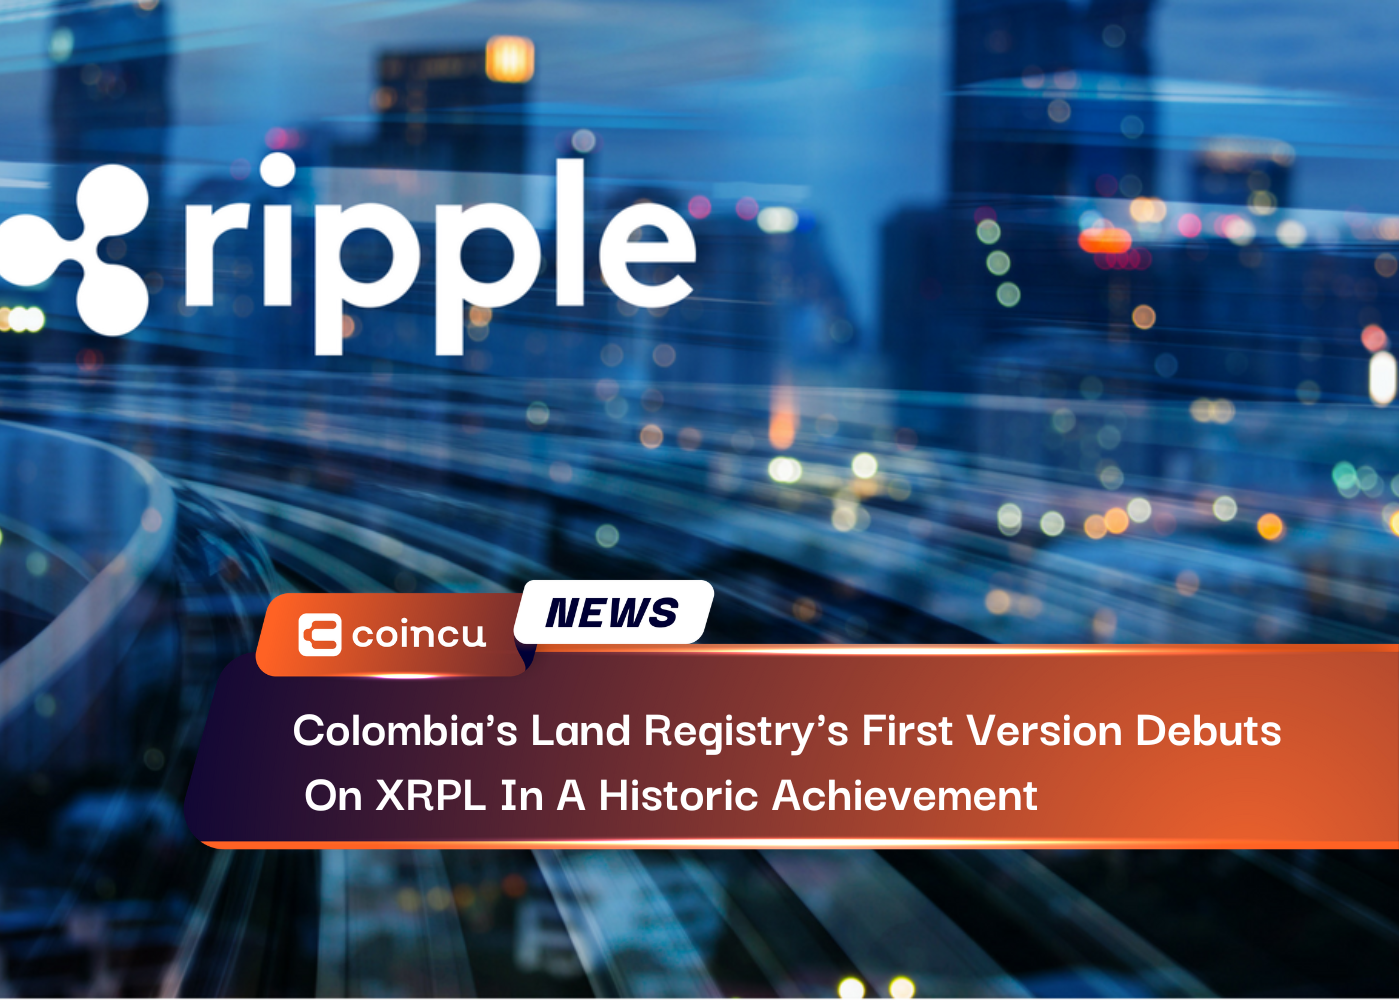 On XRPL In A Historic Achievement